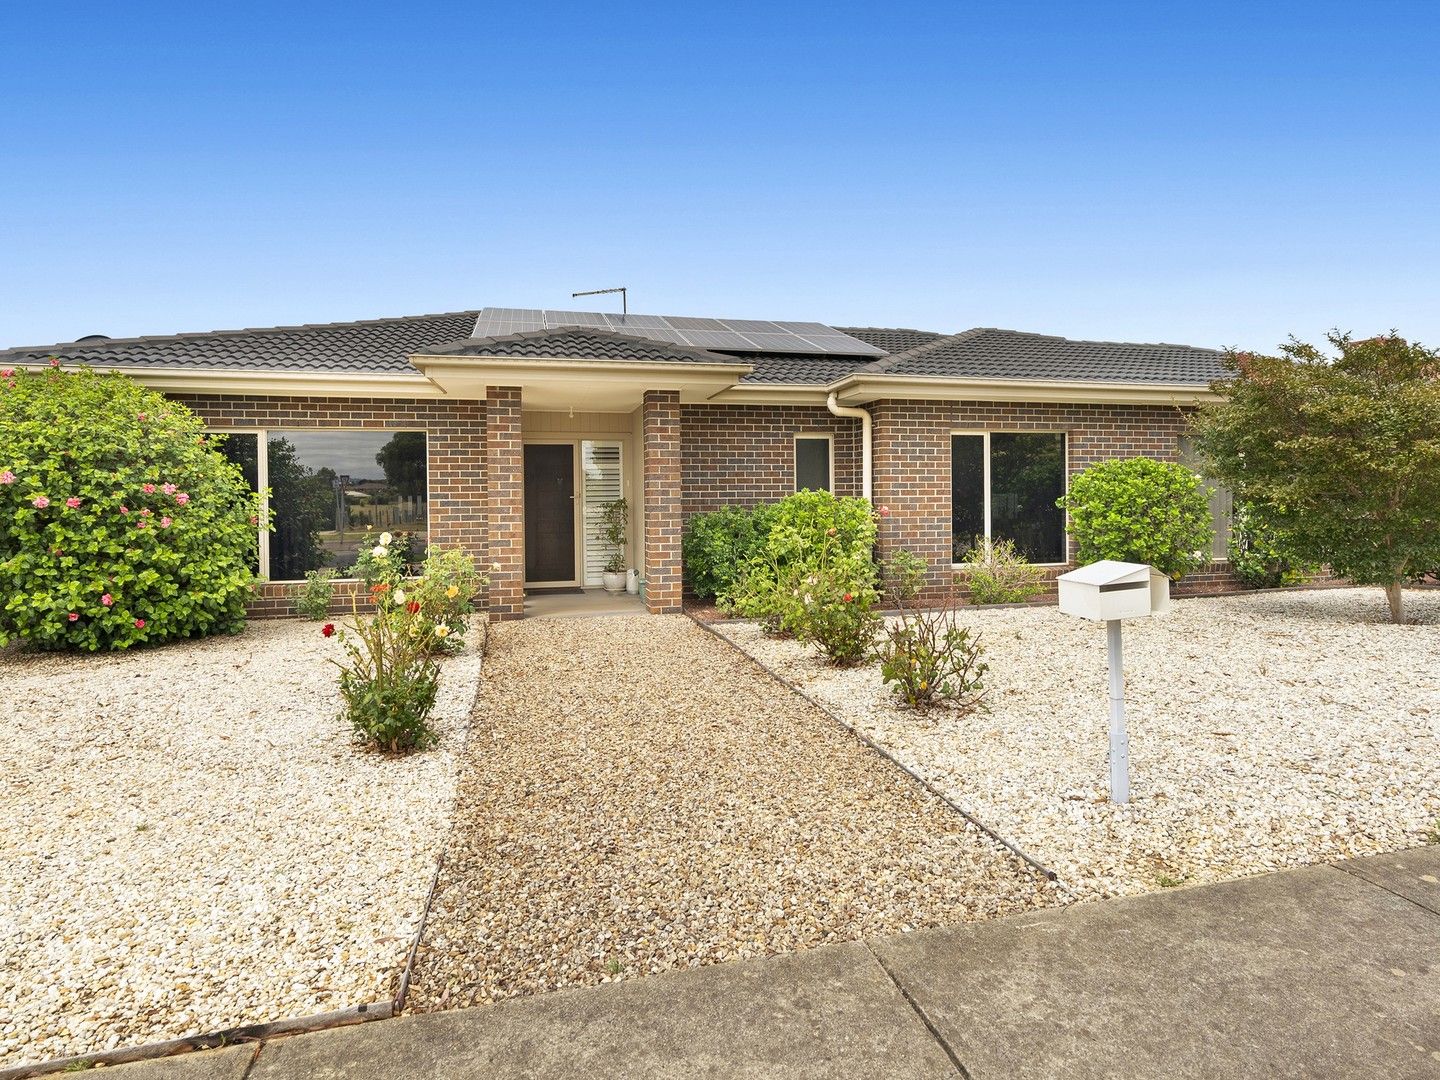 3 bedrooms House in 1/125 Holts Lane DARLEY VIC, 3340